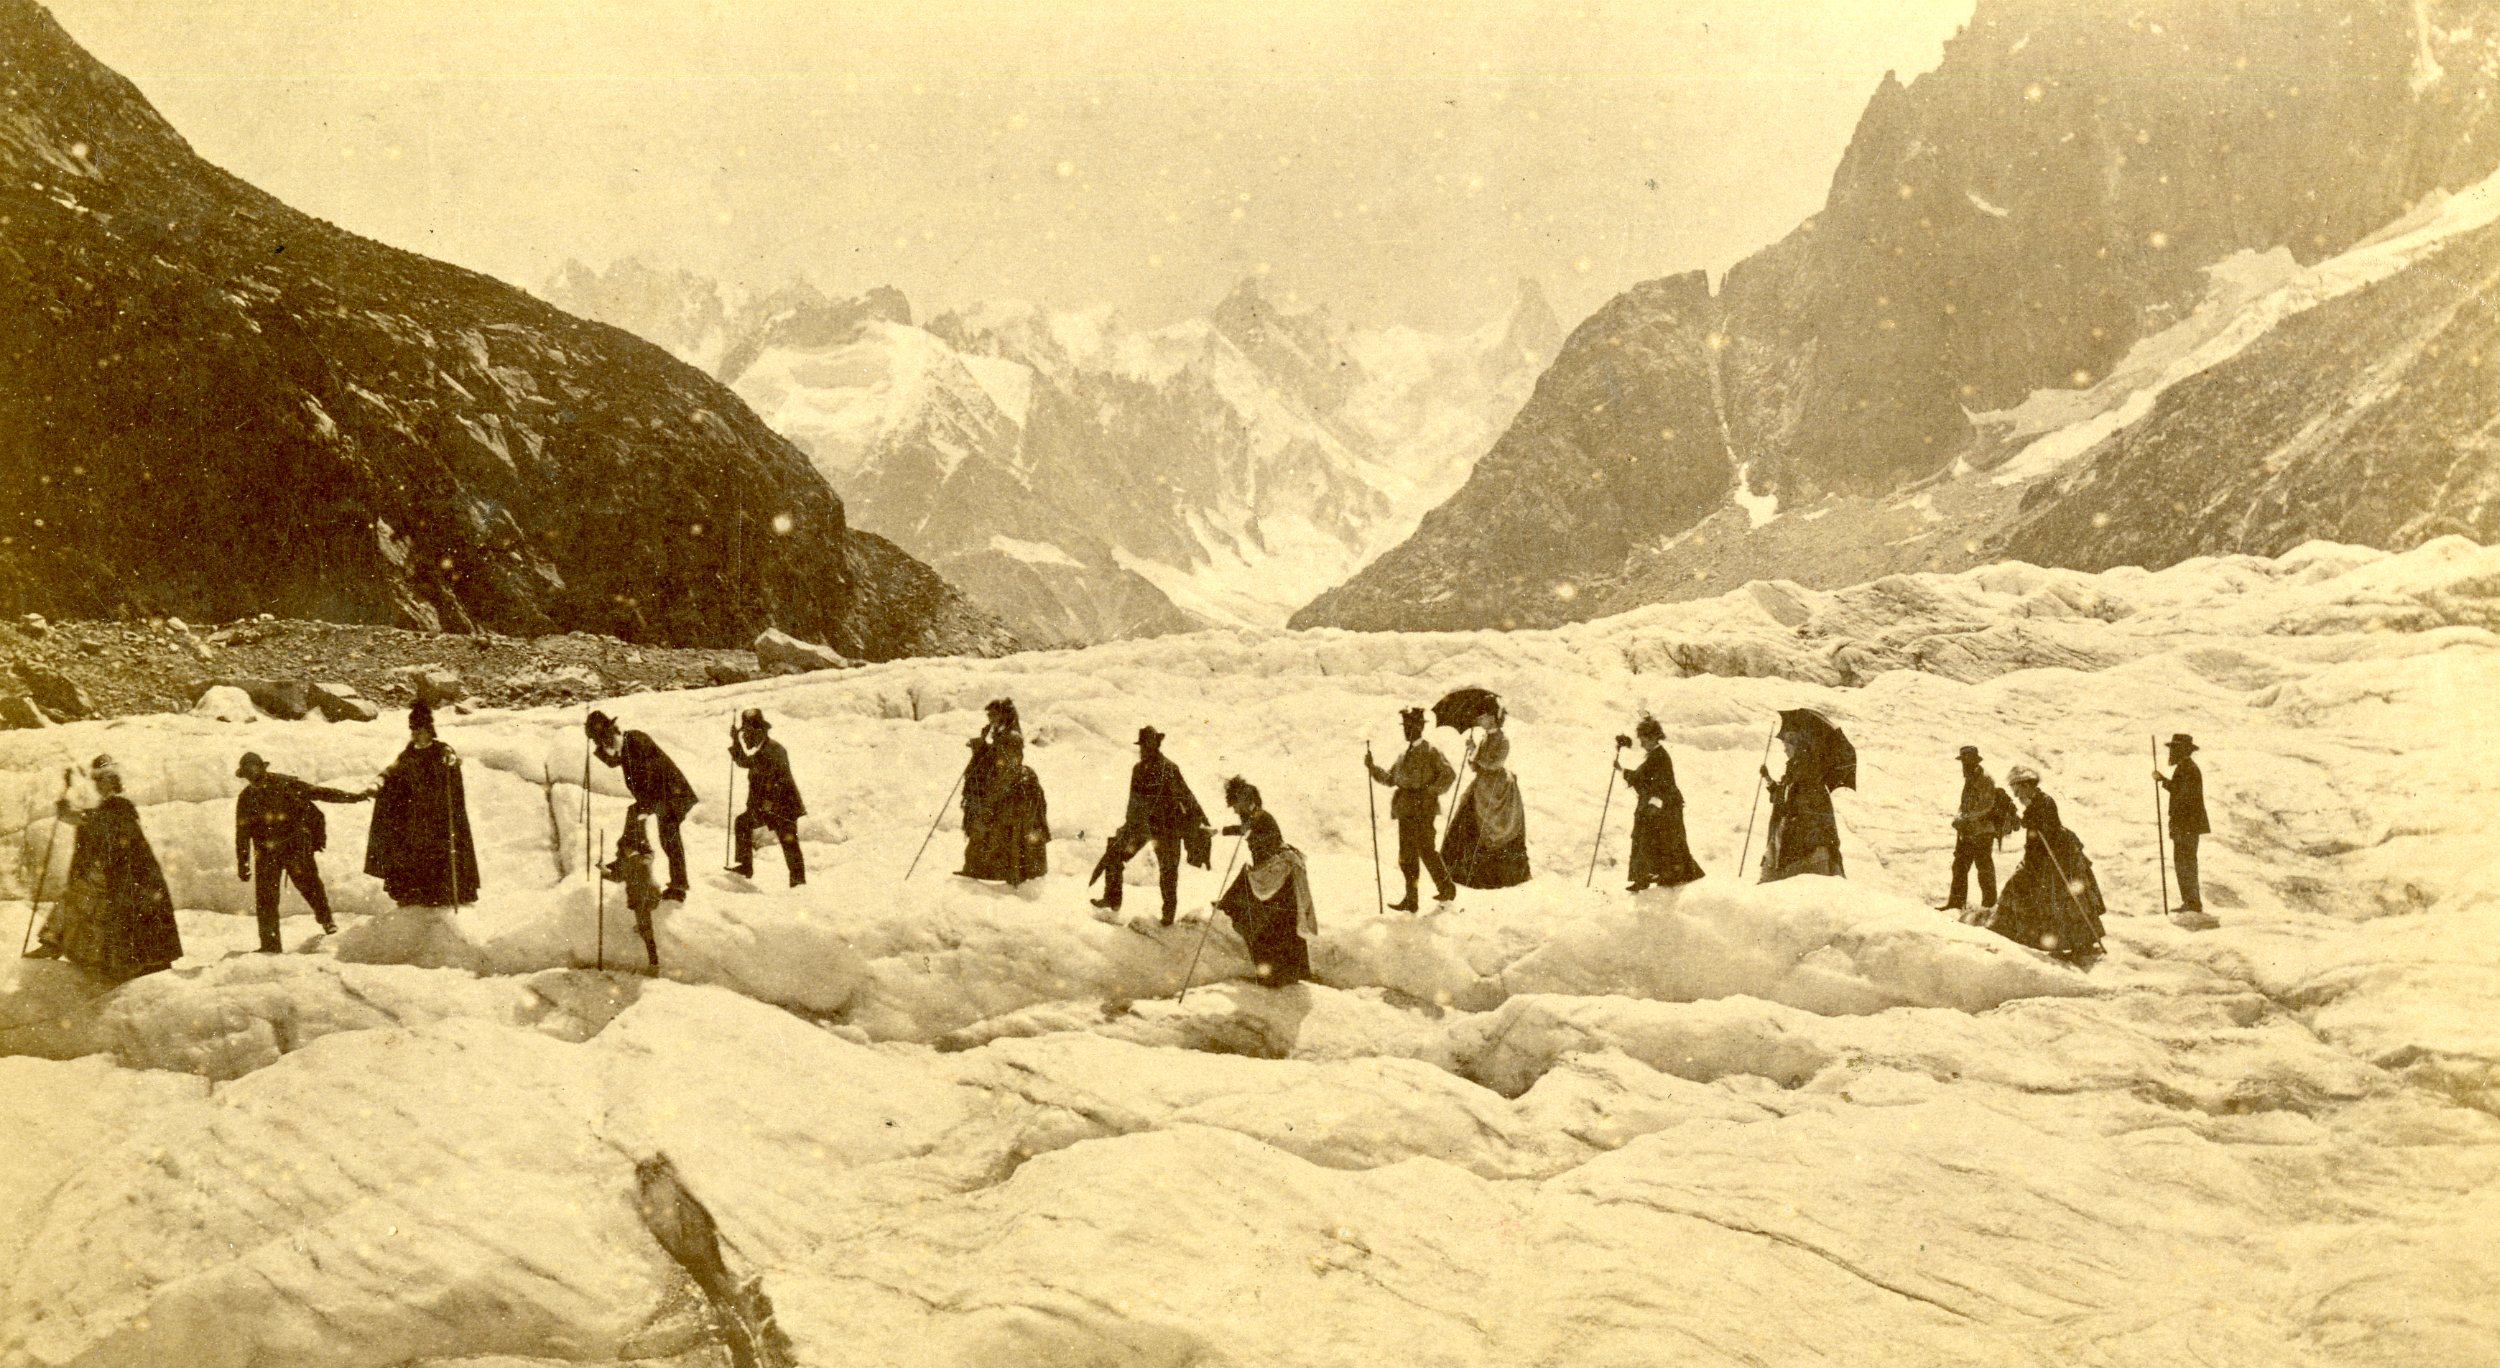  A party of mountaineers crossing a glacier in the 1870’s or 1880’s. The leader of the party used a hand axe to cut steps into the snow - the rest of the party used alpenstocks for balance. 